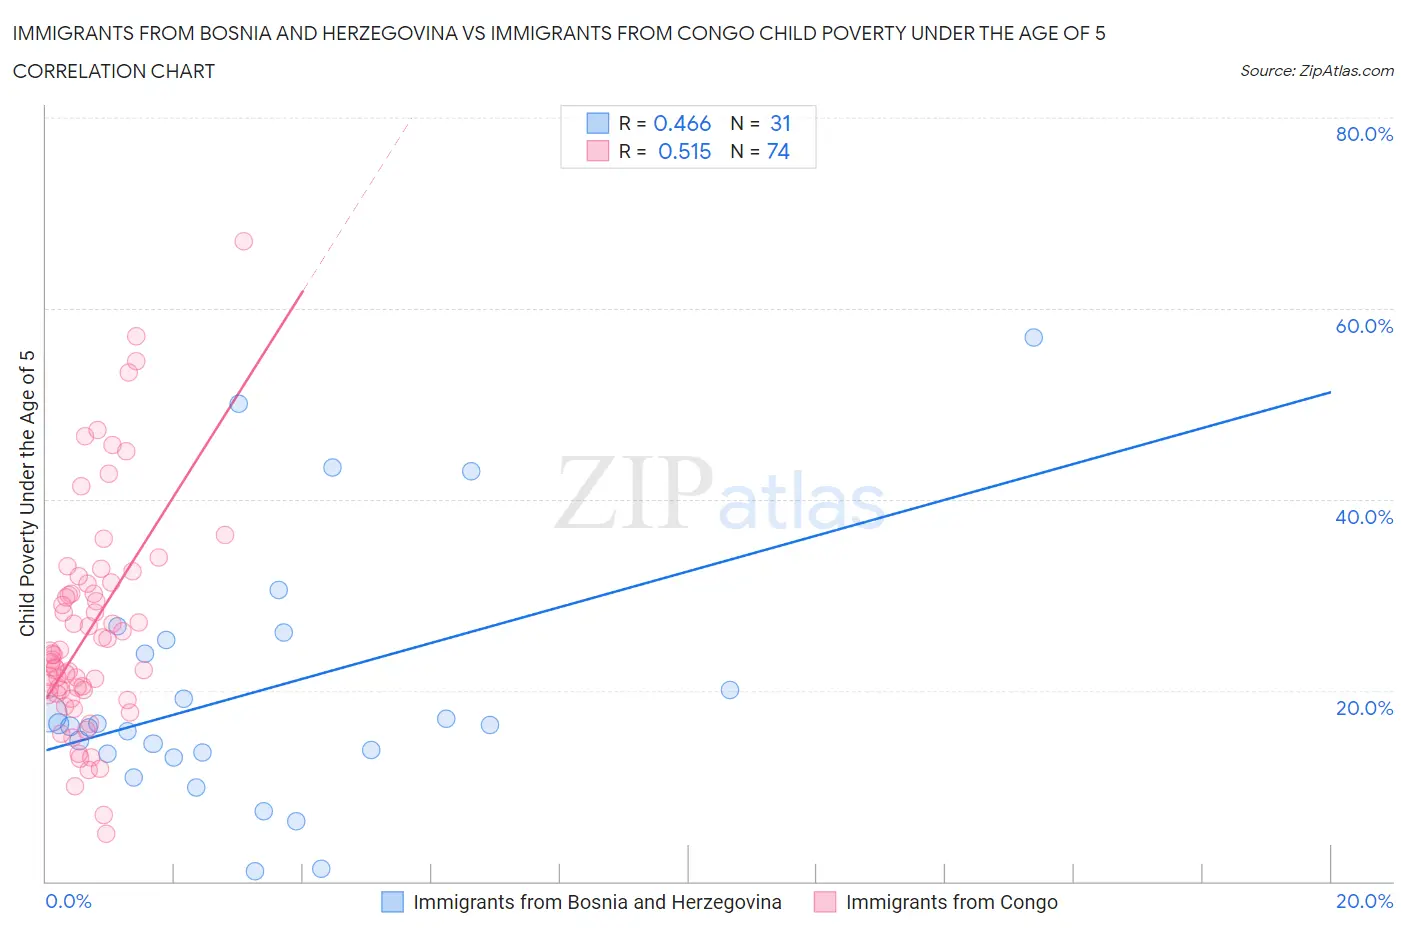 Immigrants from Bosnia and Herzegovina vs Immigrants from Congo Child Poverty Under the Age of 5